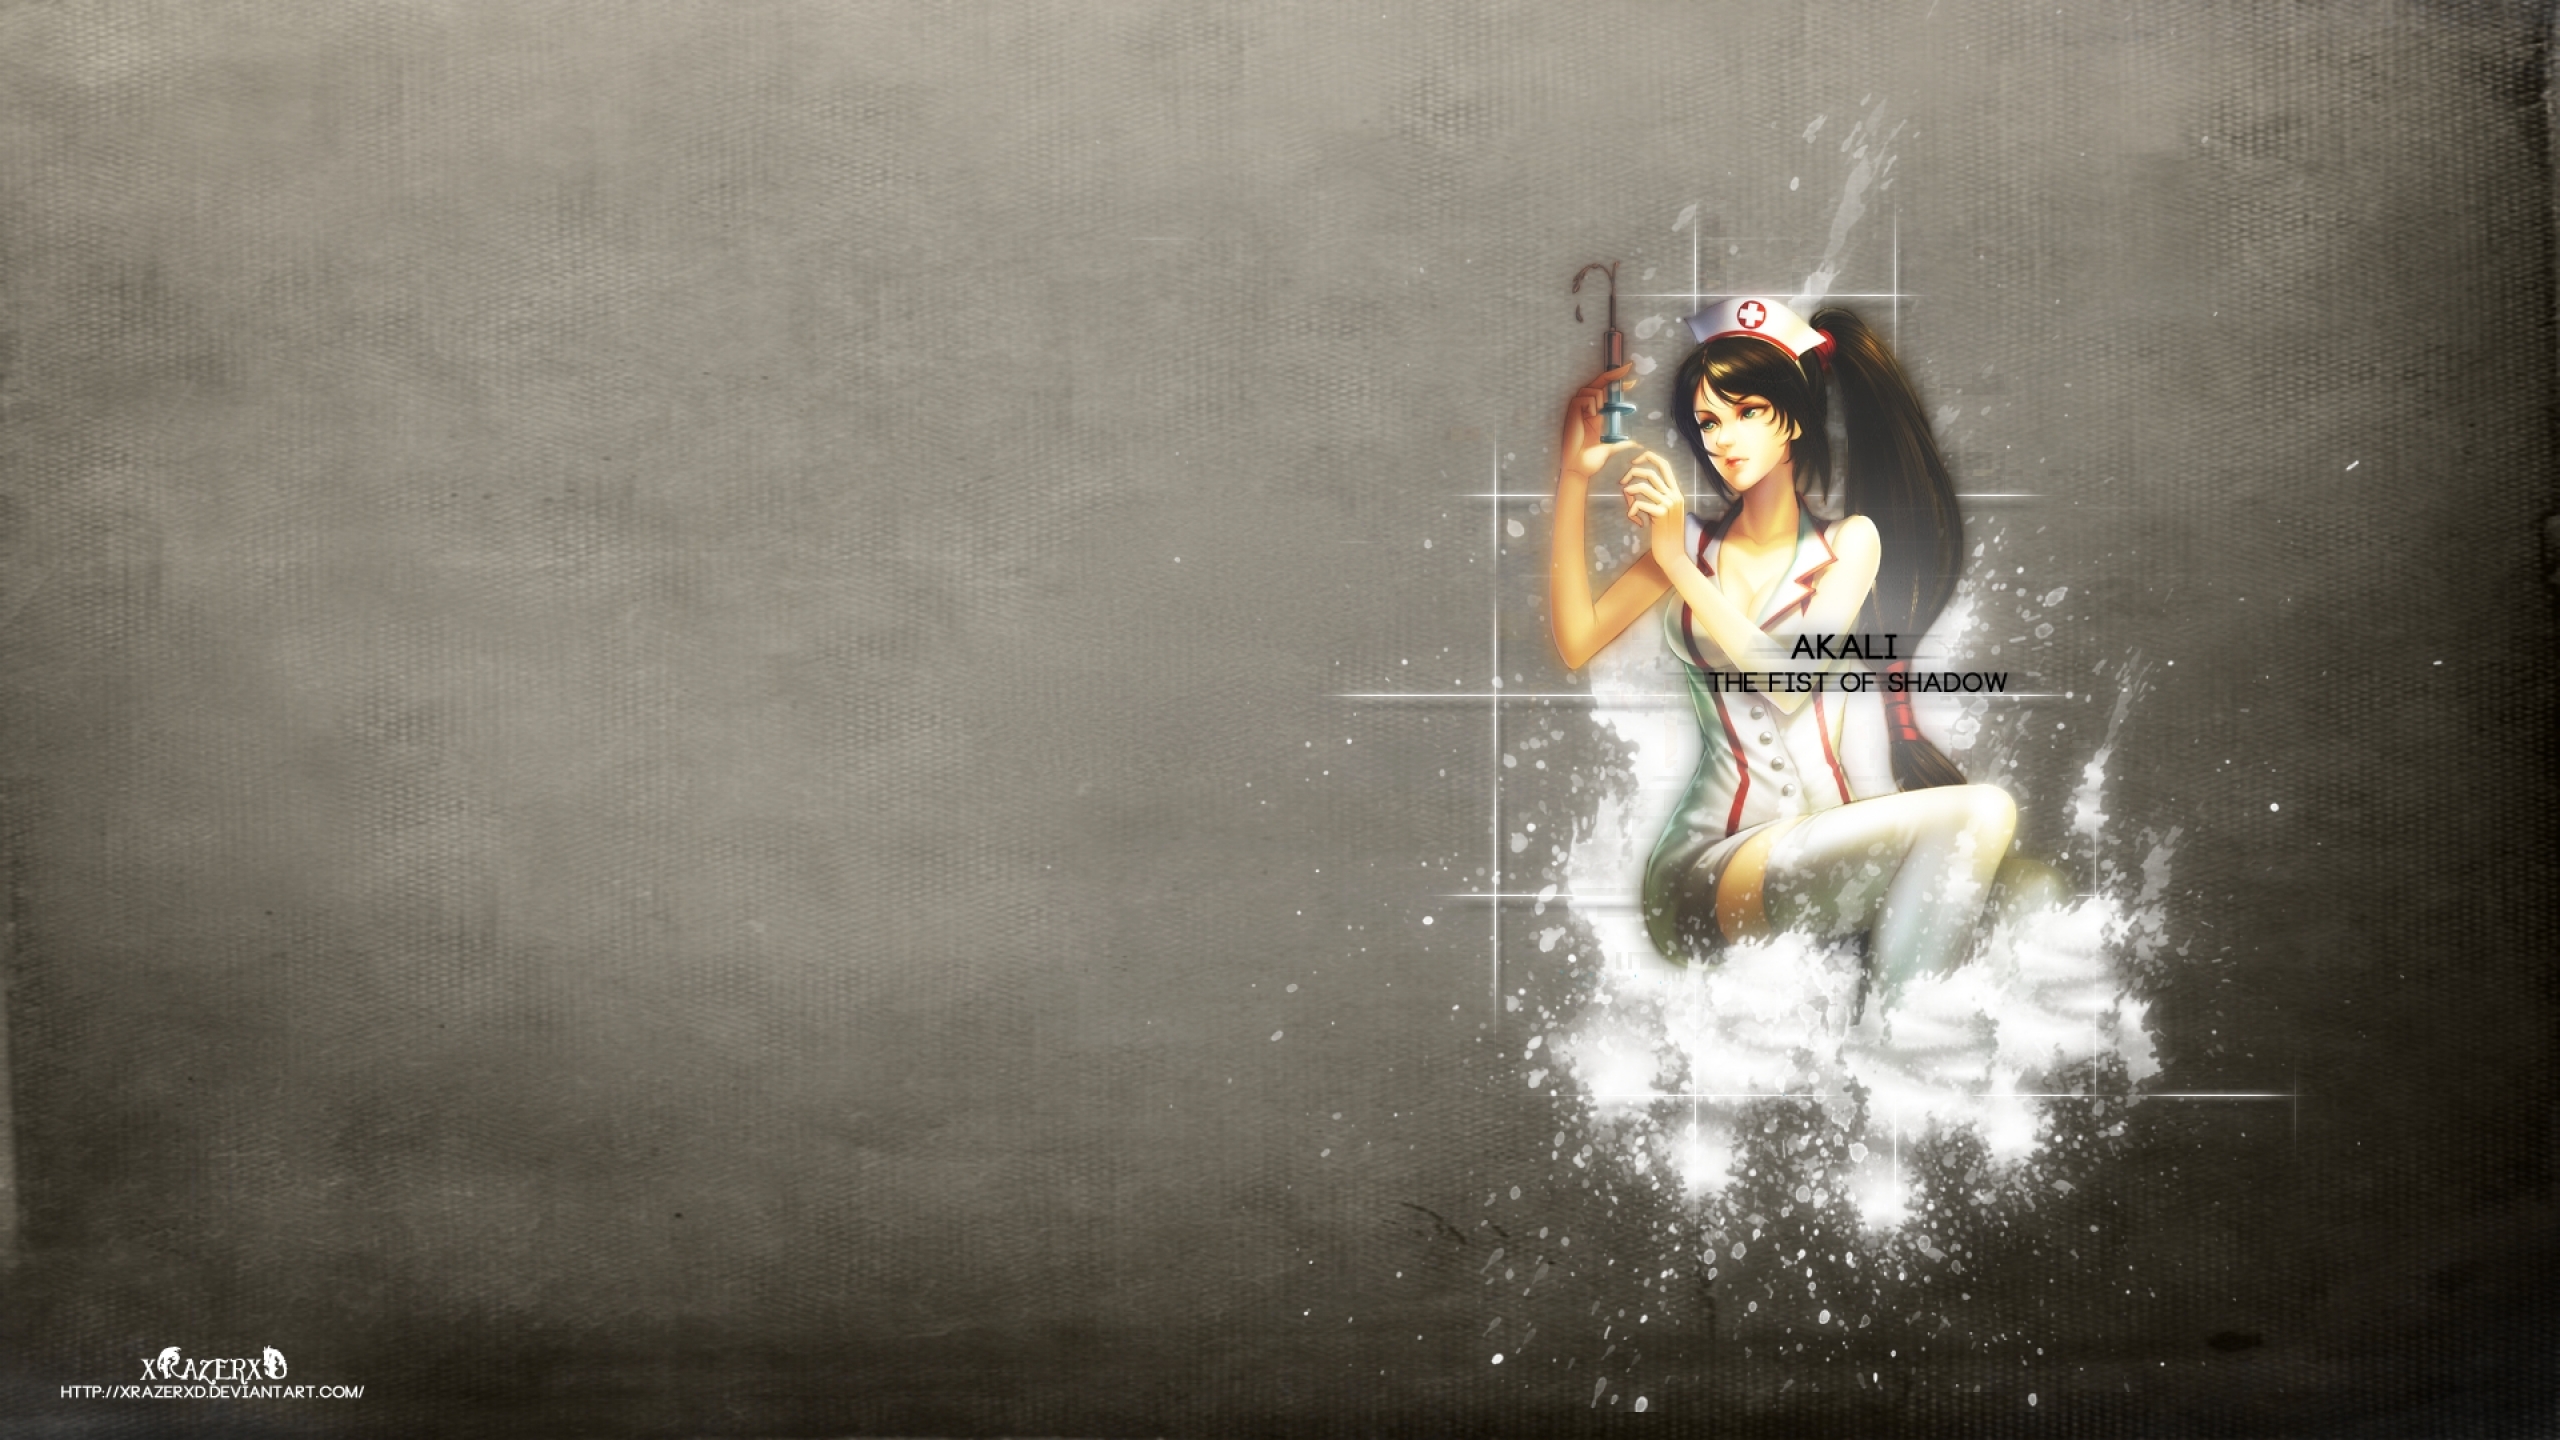 Download Wallpapers, Download 2560x1440 league of legends akali